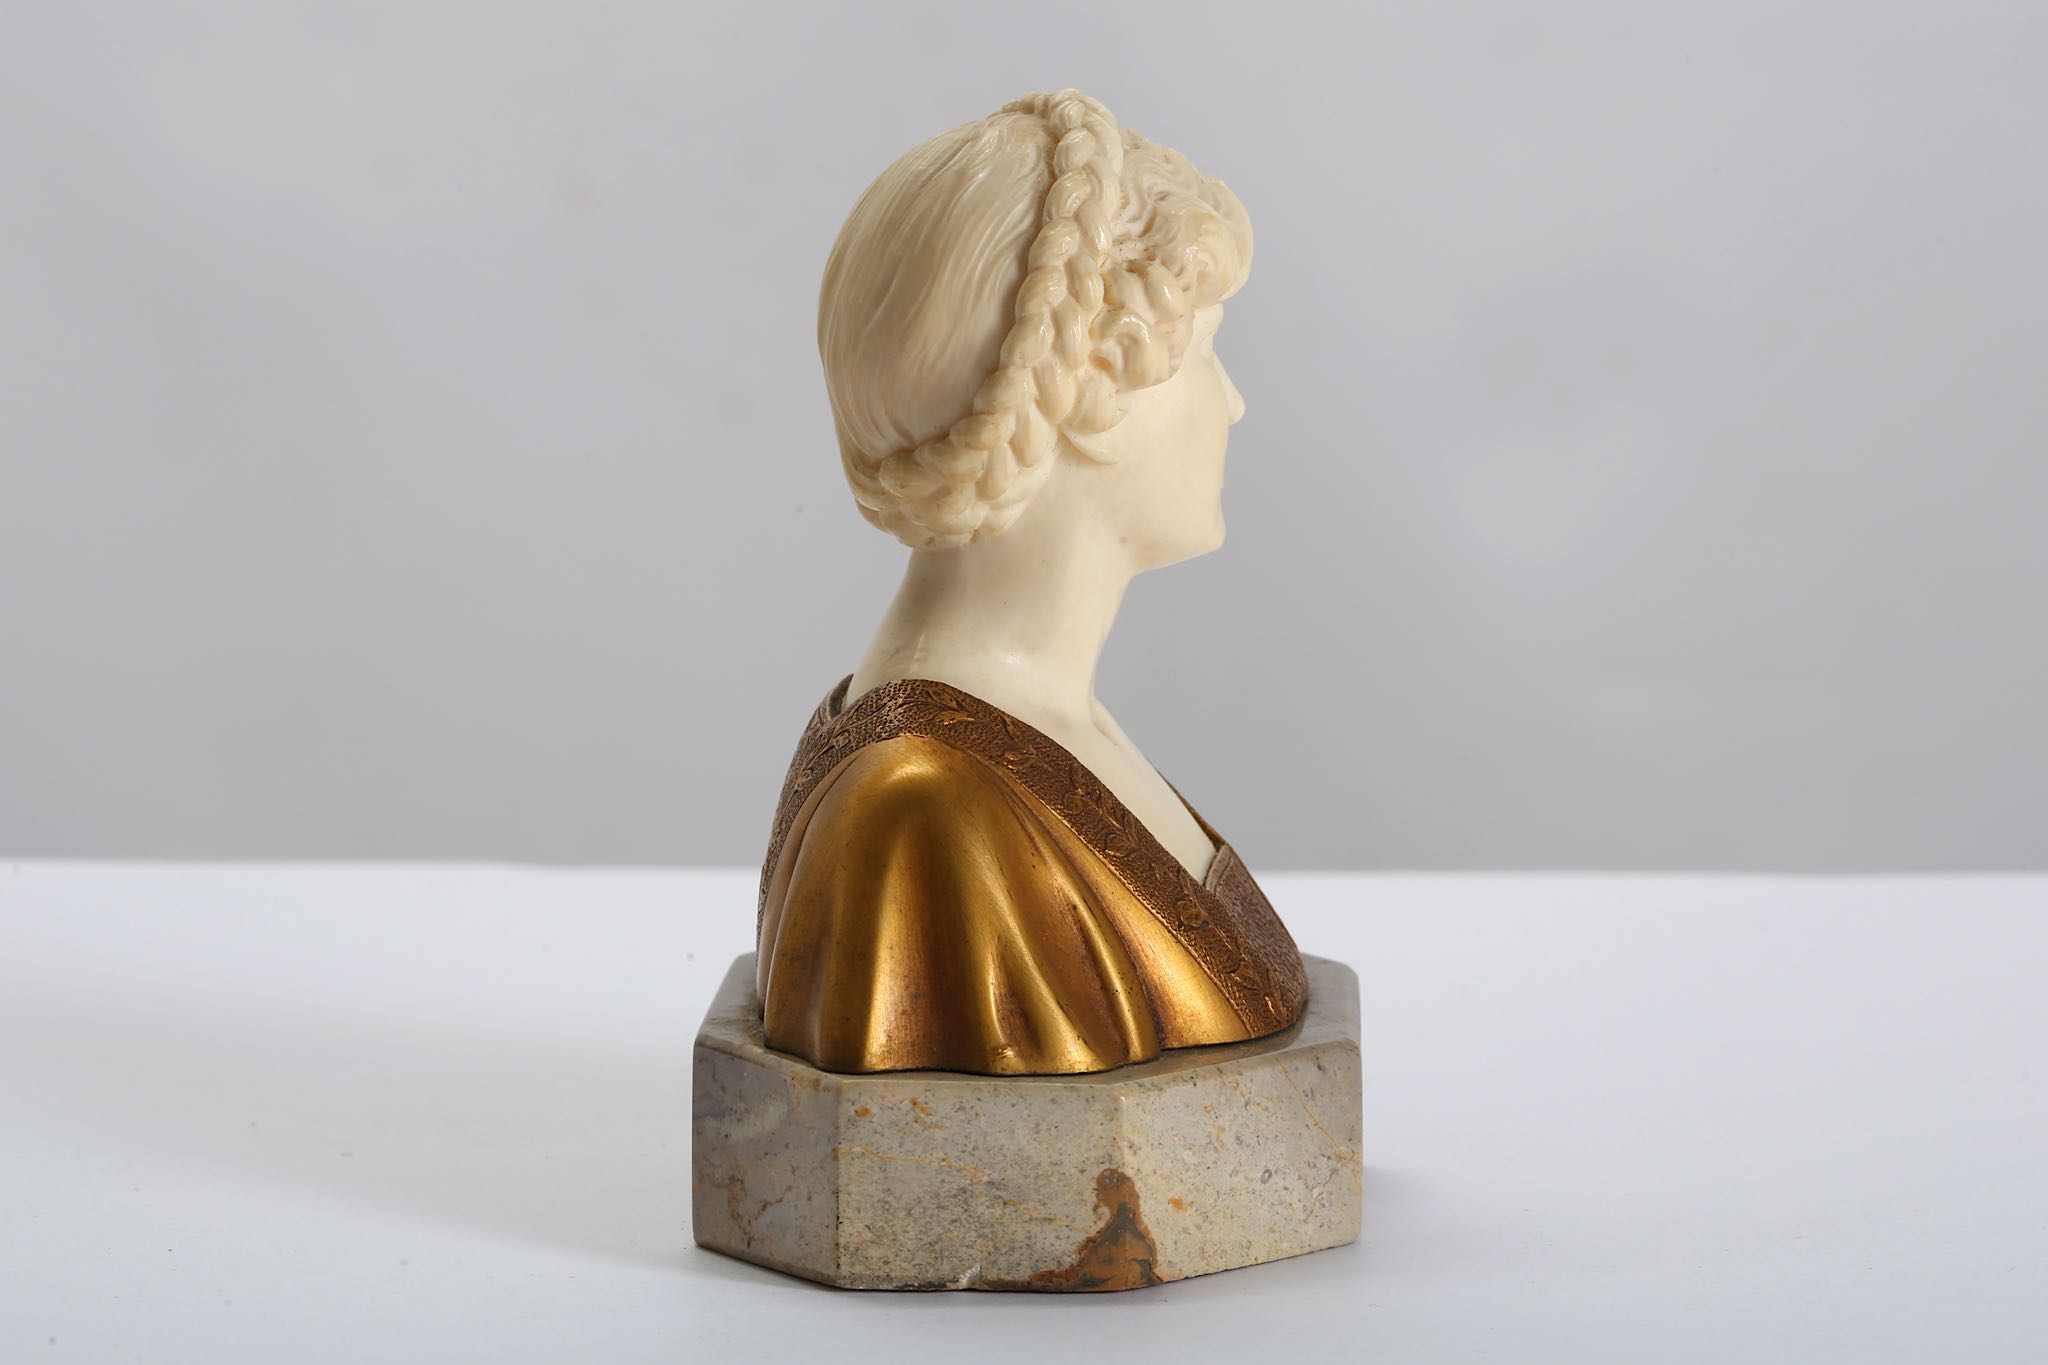 FERDINAND PREISS (GERMAN 1892-1943): AN IVORY AND GILT BRONZE BUST OF A GIRL  the young beauty - Image 3 of 8